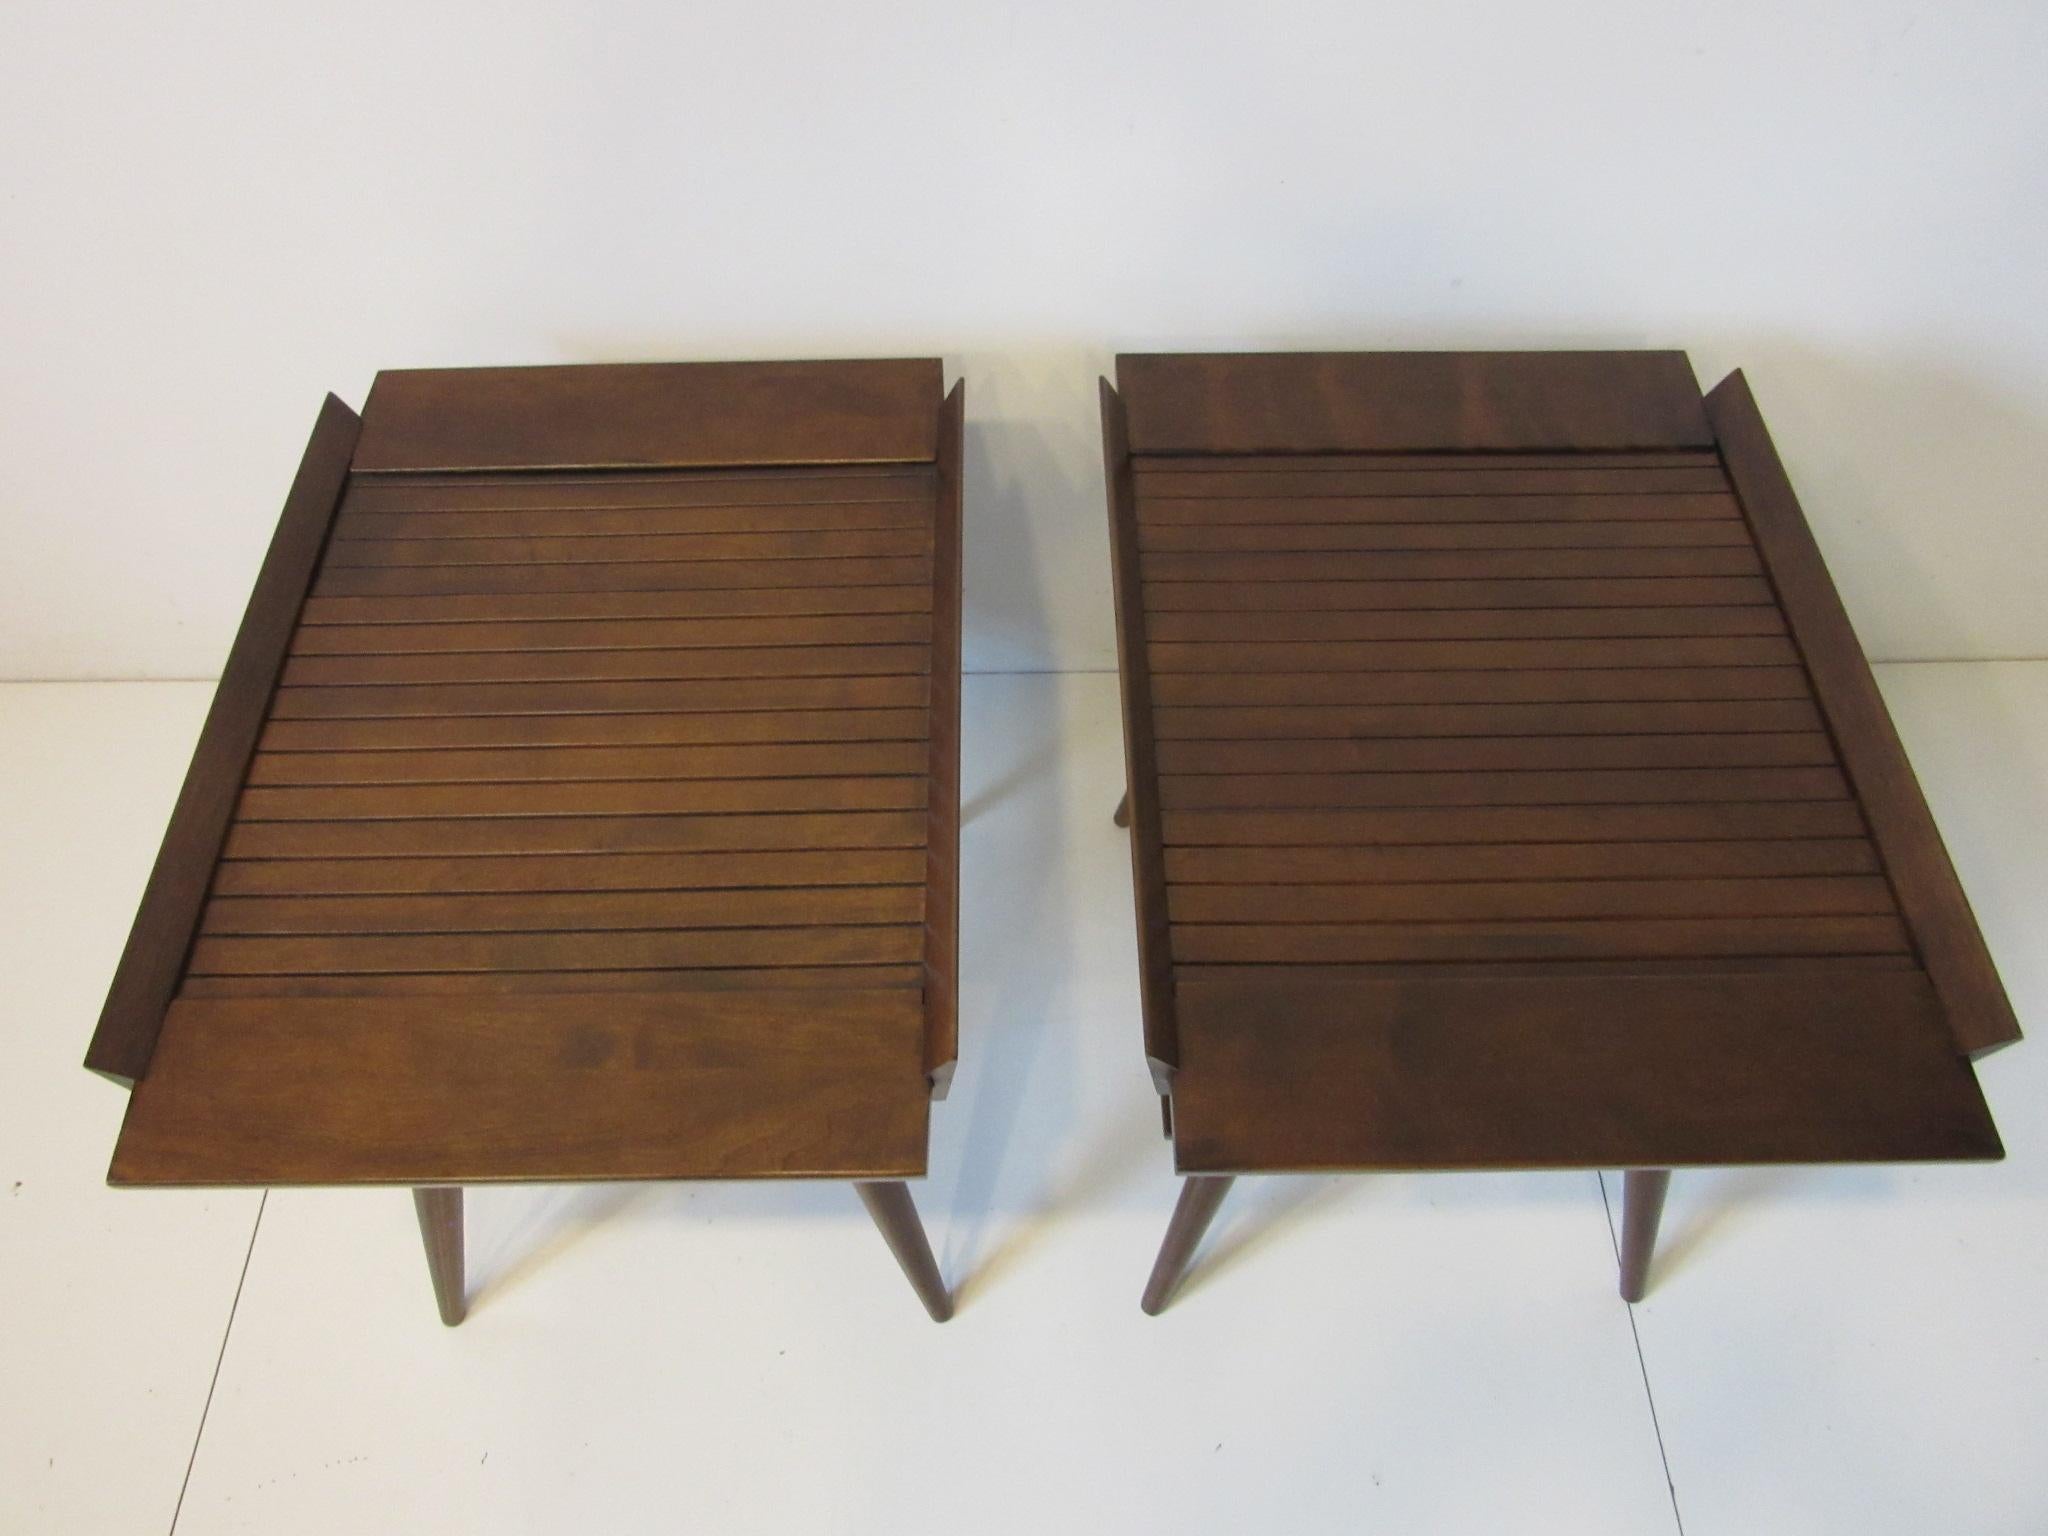 20th Century Leslie Diamond Modernmates Side Tables / Nightstands for Conant Ball